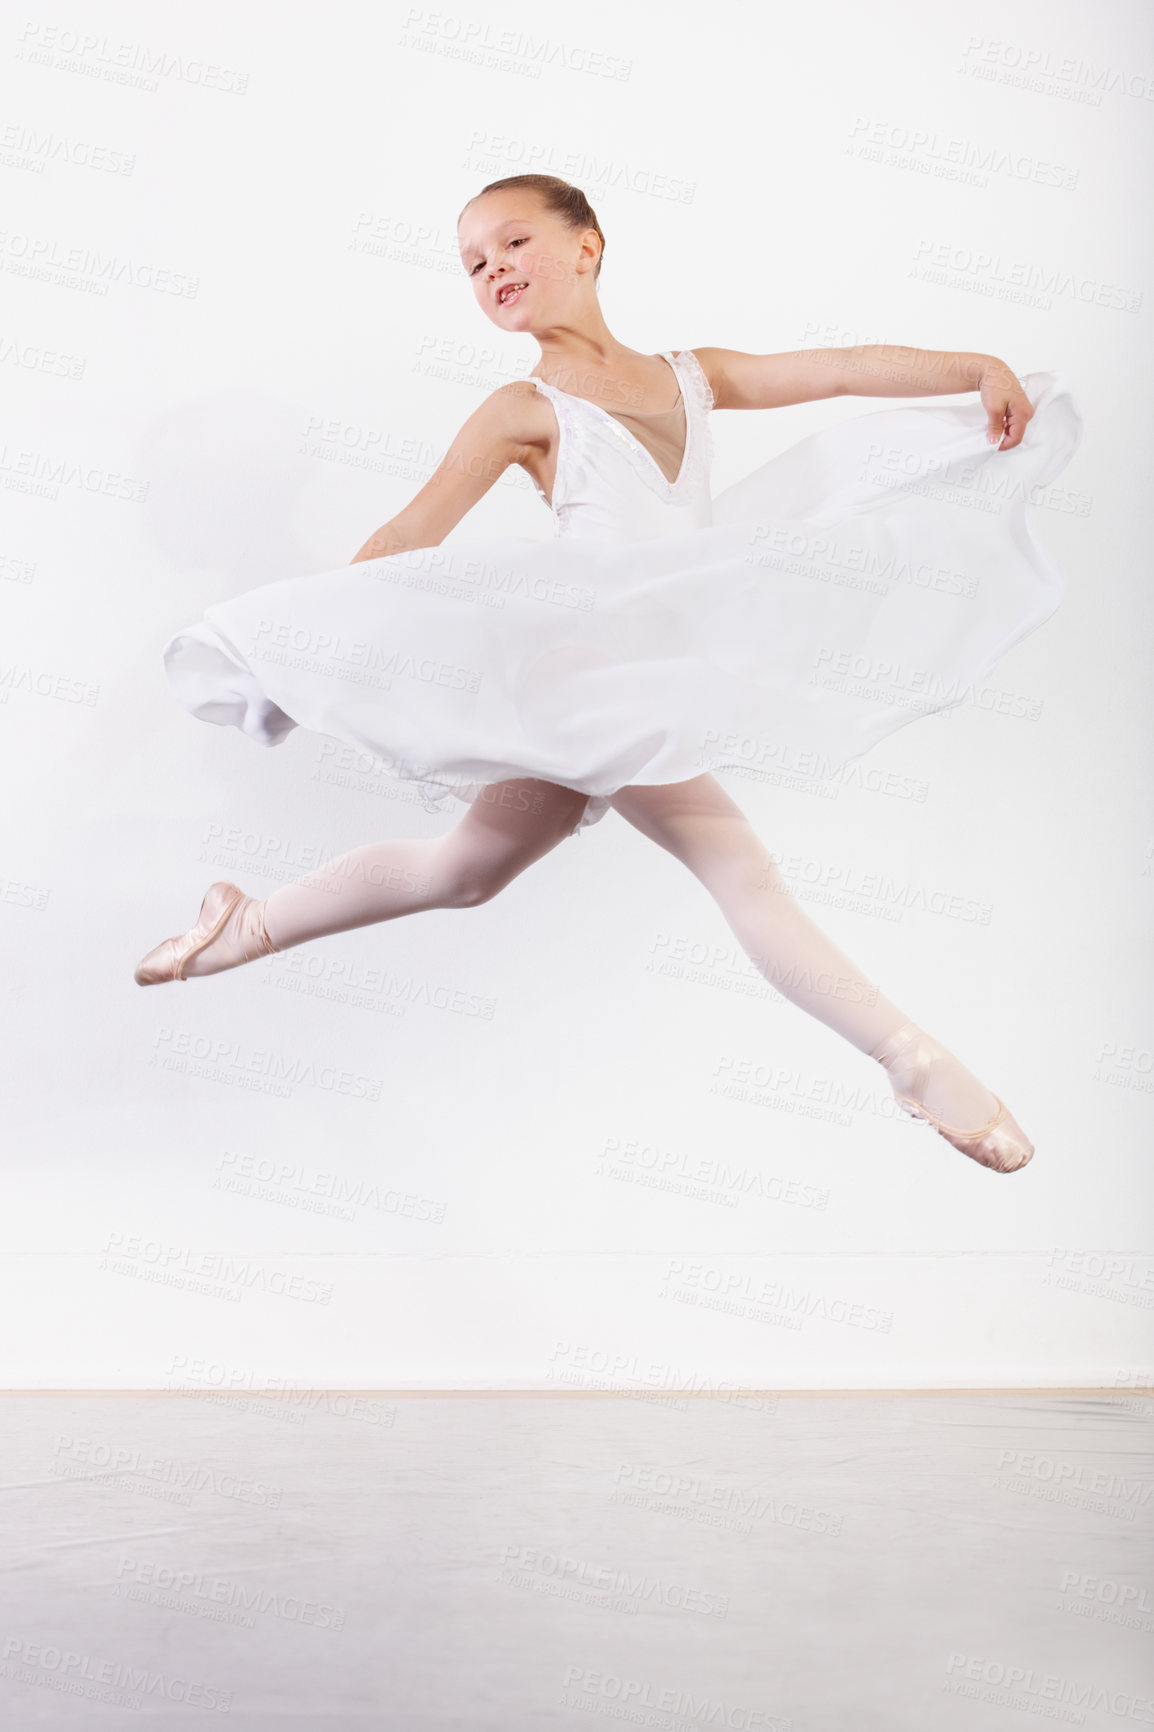 Buy stock photo Shot of a young ballerina leaping across the floor of a dance studio